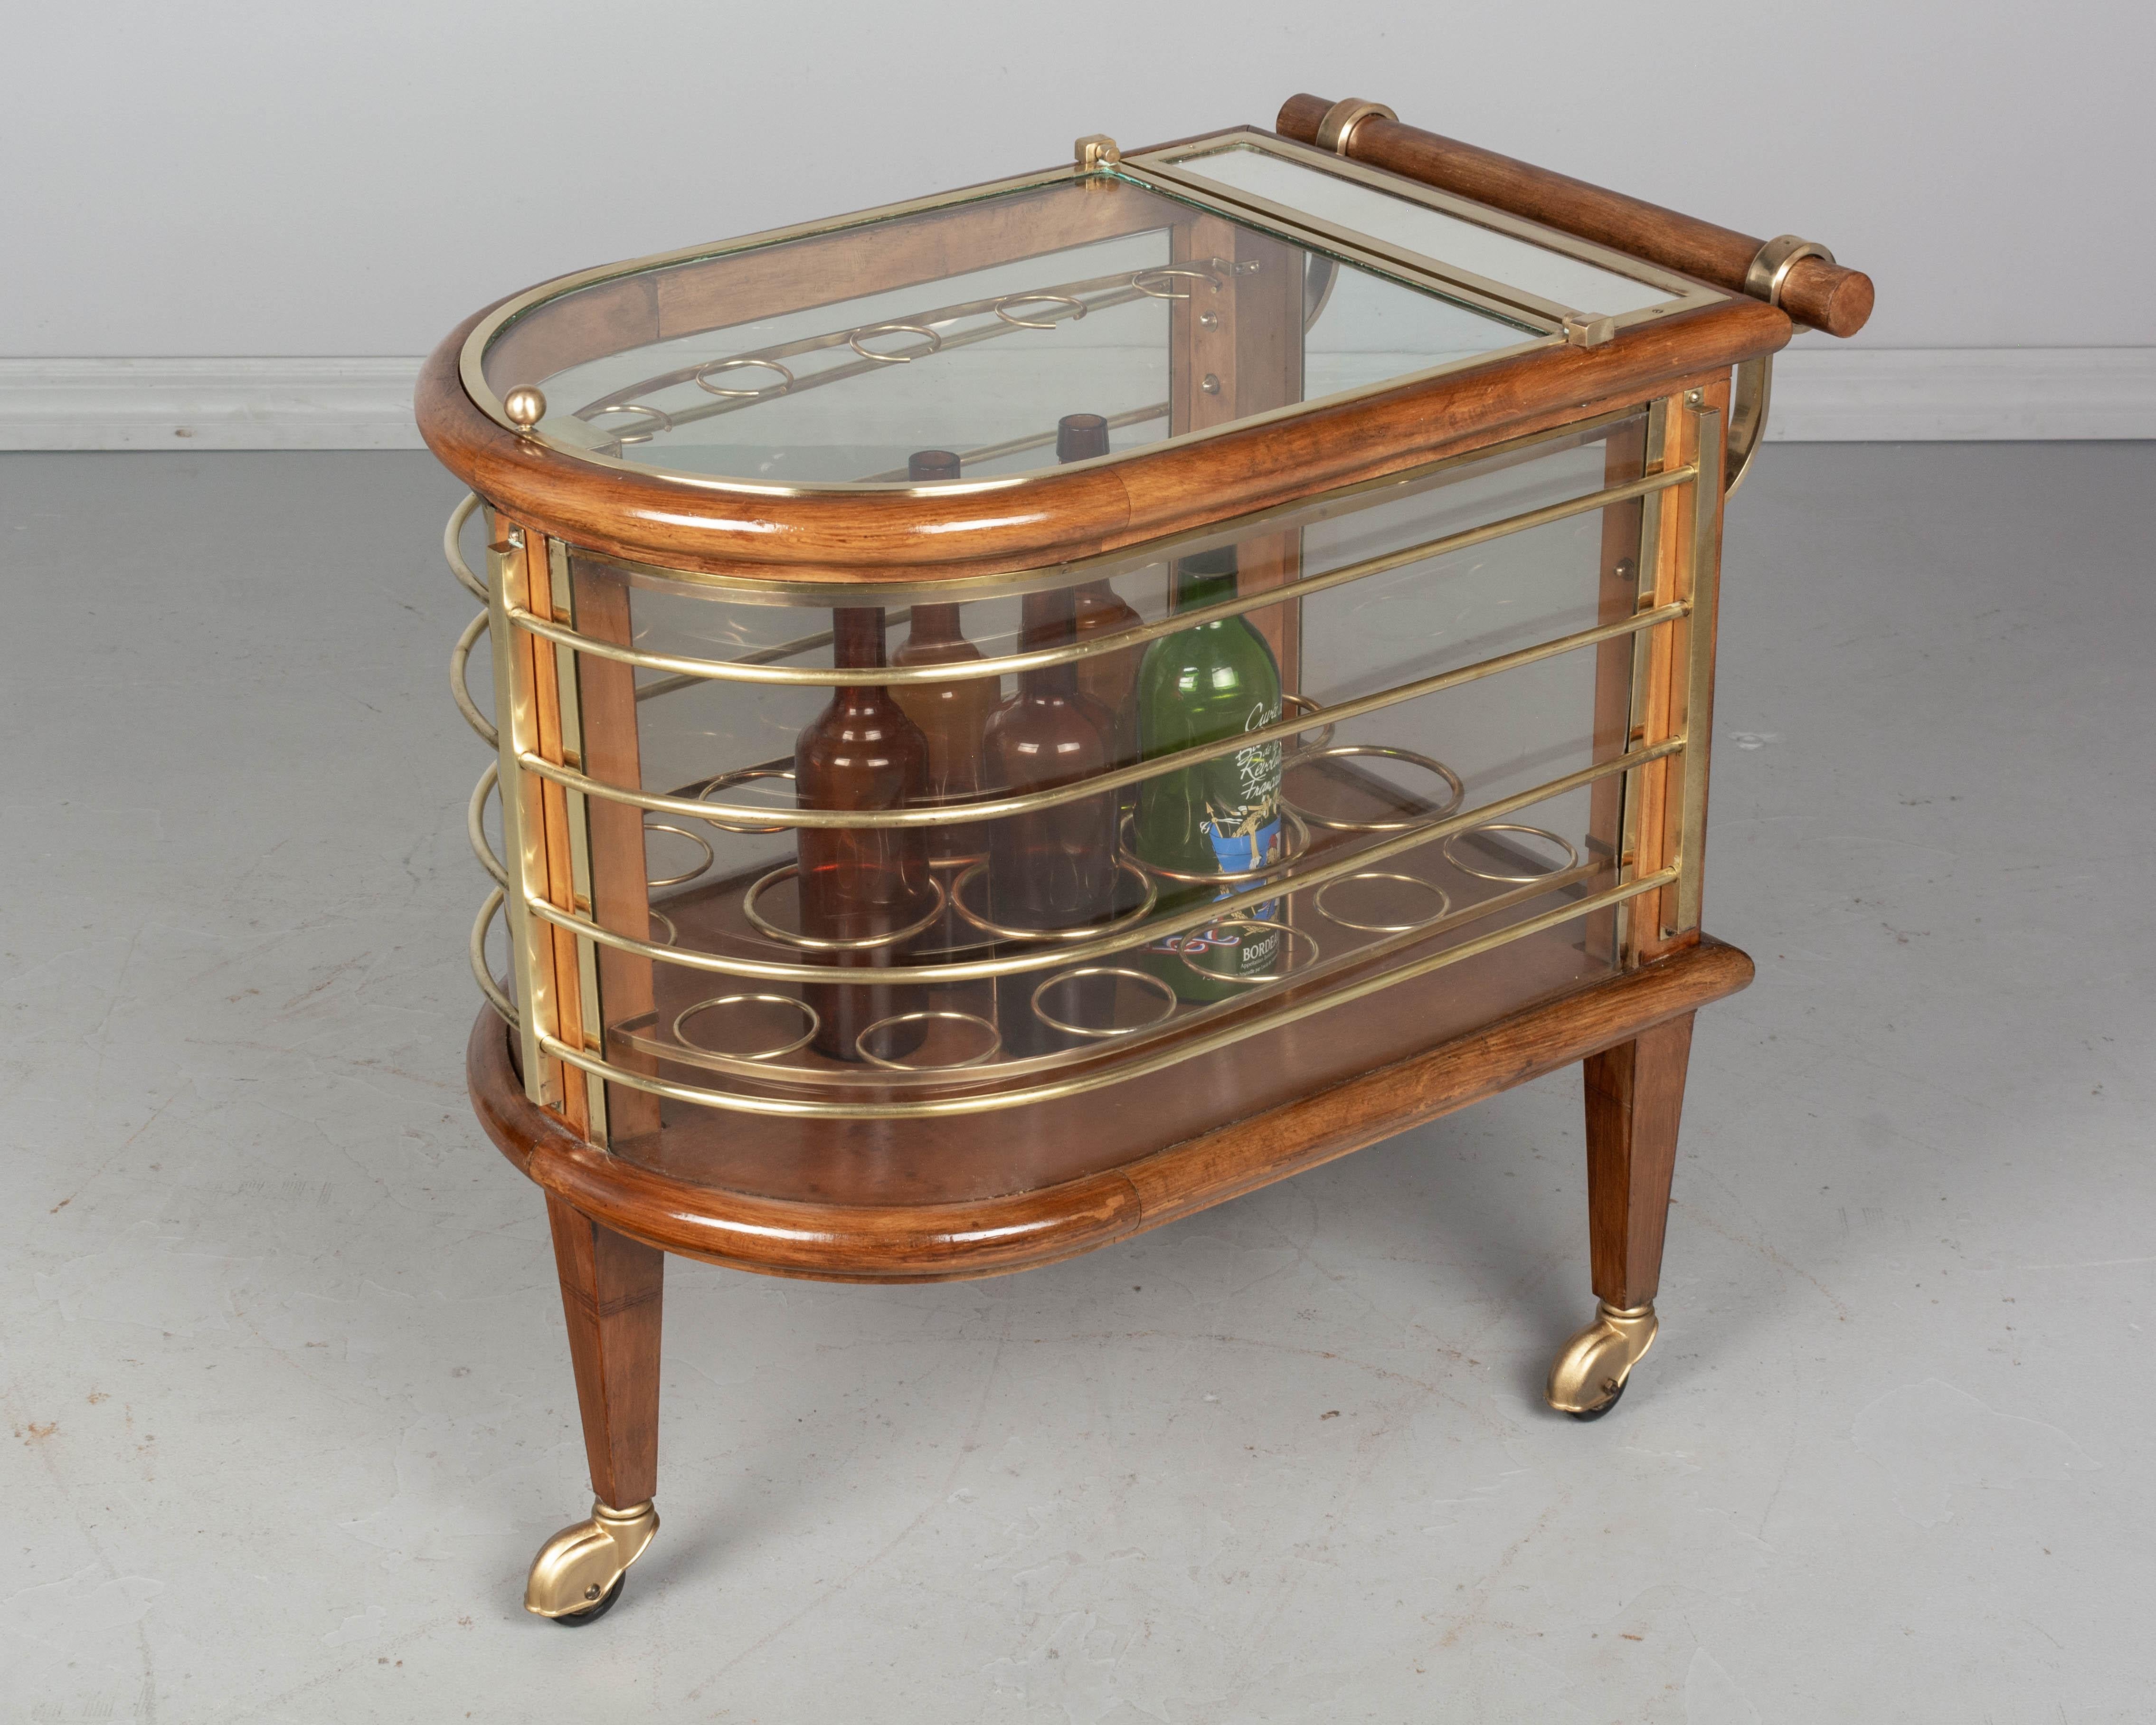 A Mid-Century Modern French Art Deco style bar cart designed by Louis Sognot. Classic ocean liner styling including a rounded end with brass wire railings, simulating a ship deck. Made of solid beechwood with curved plexiglass sides and a hinged,